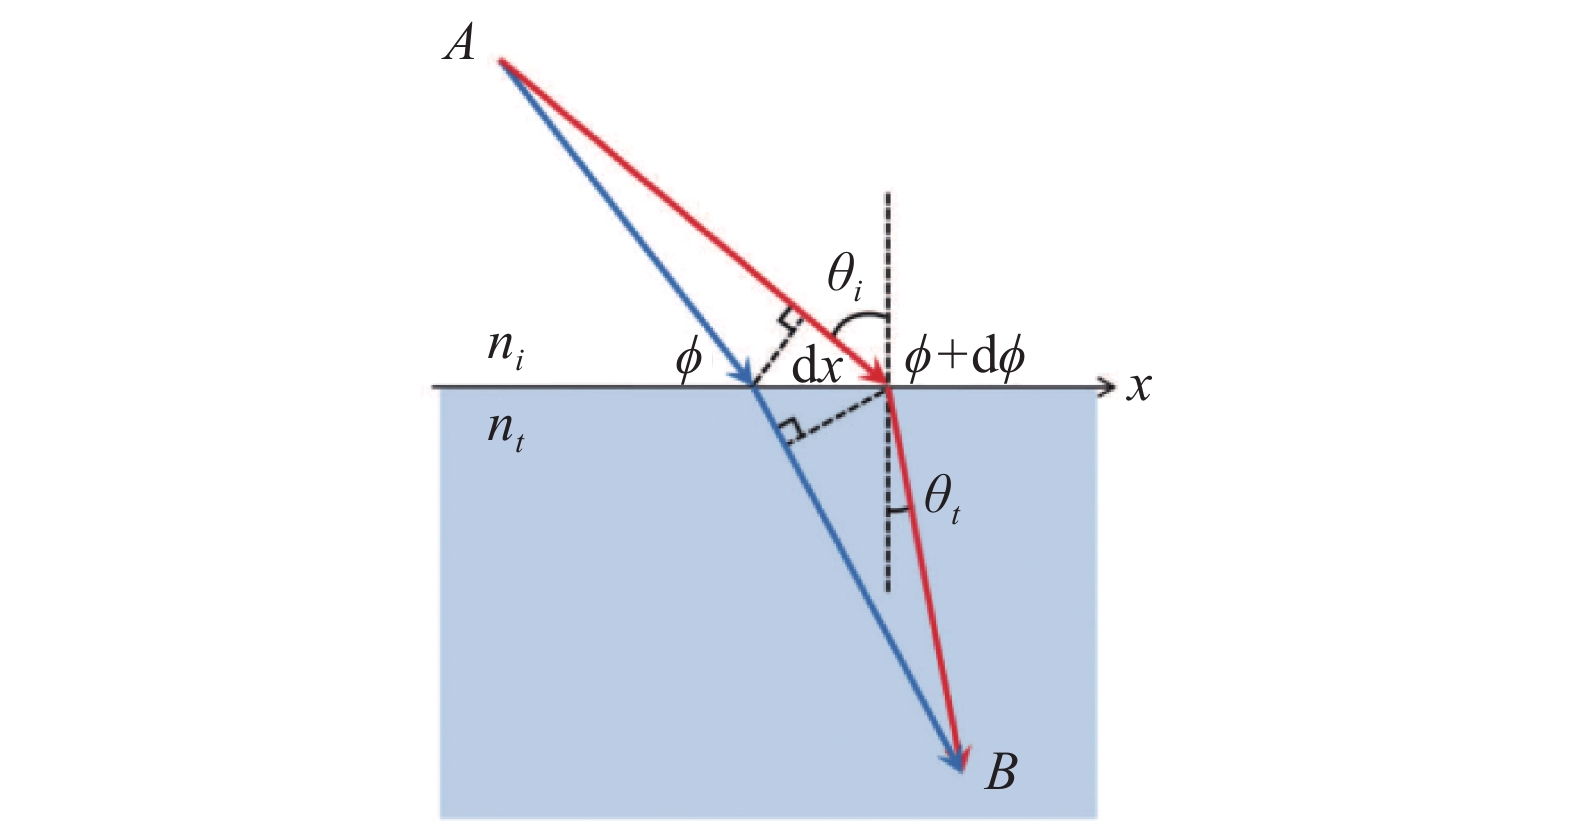 Schematics used to derive the generalized Snell's law of refraction[14]